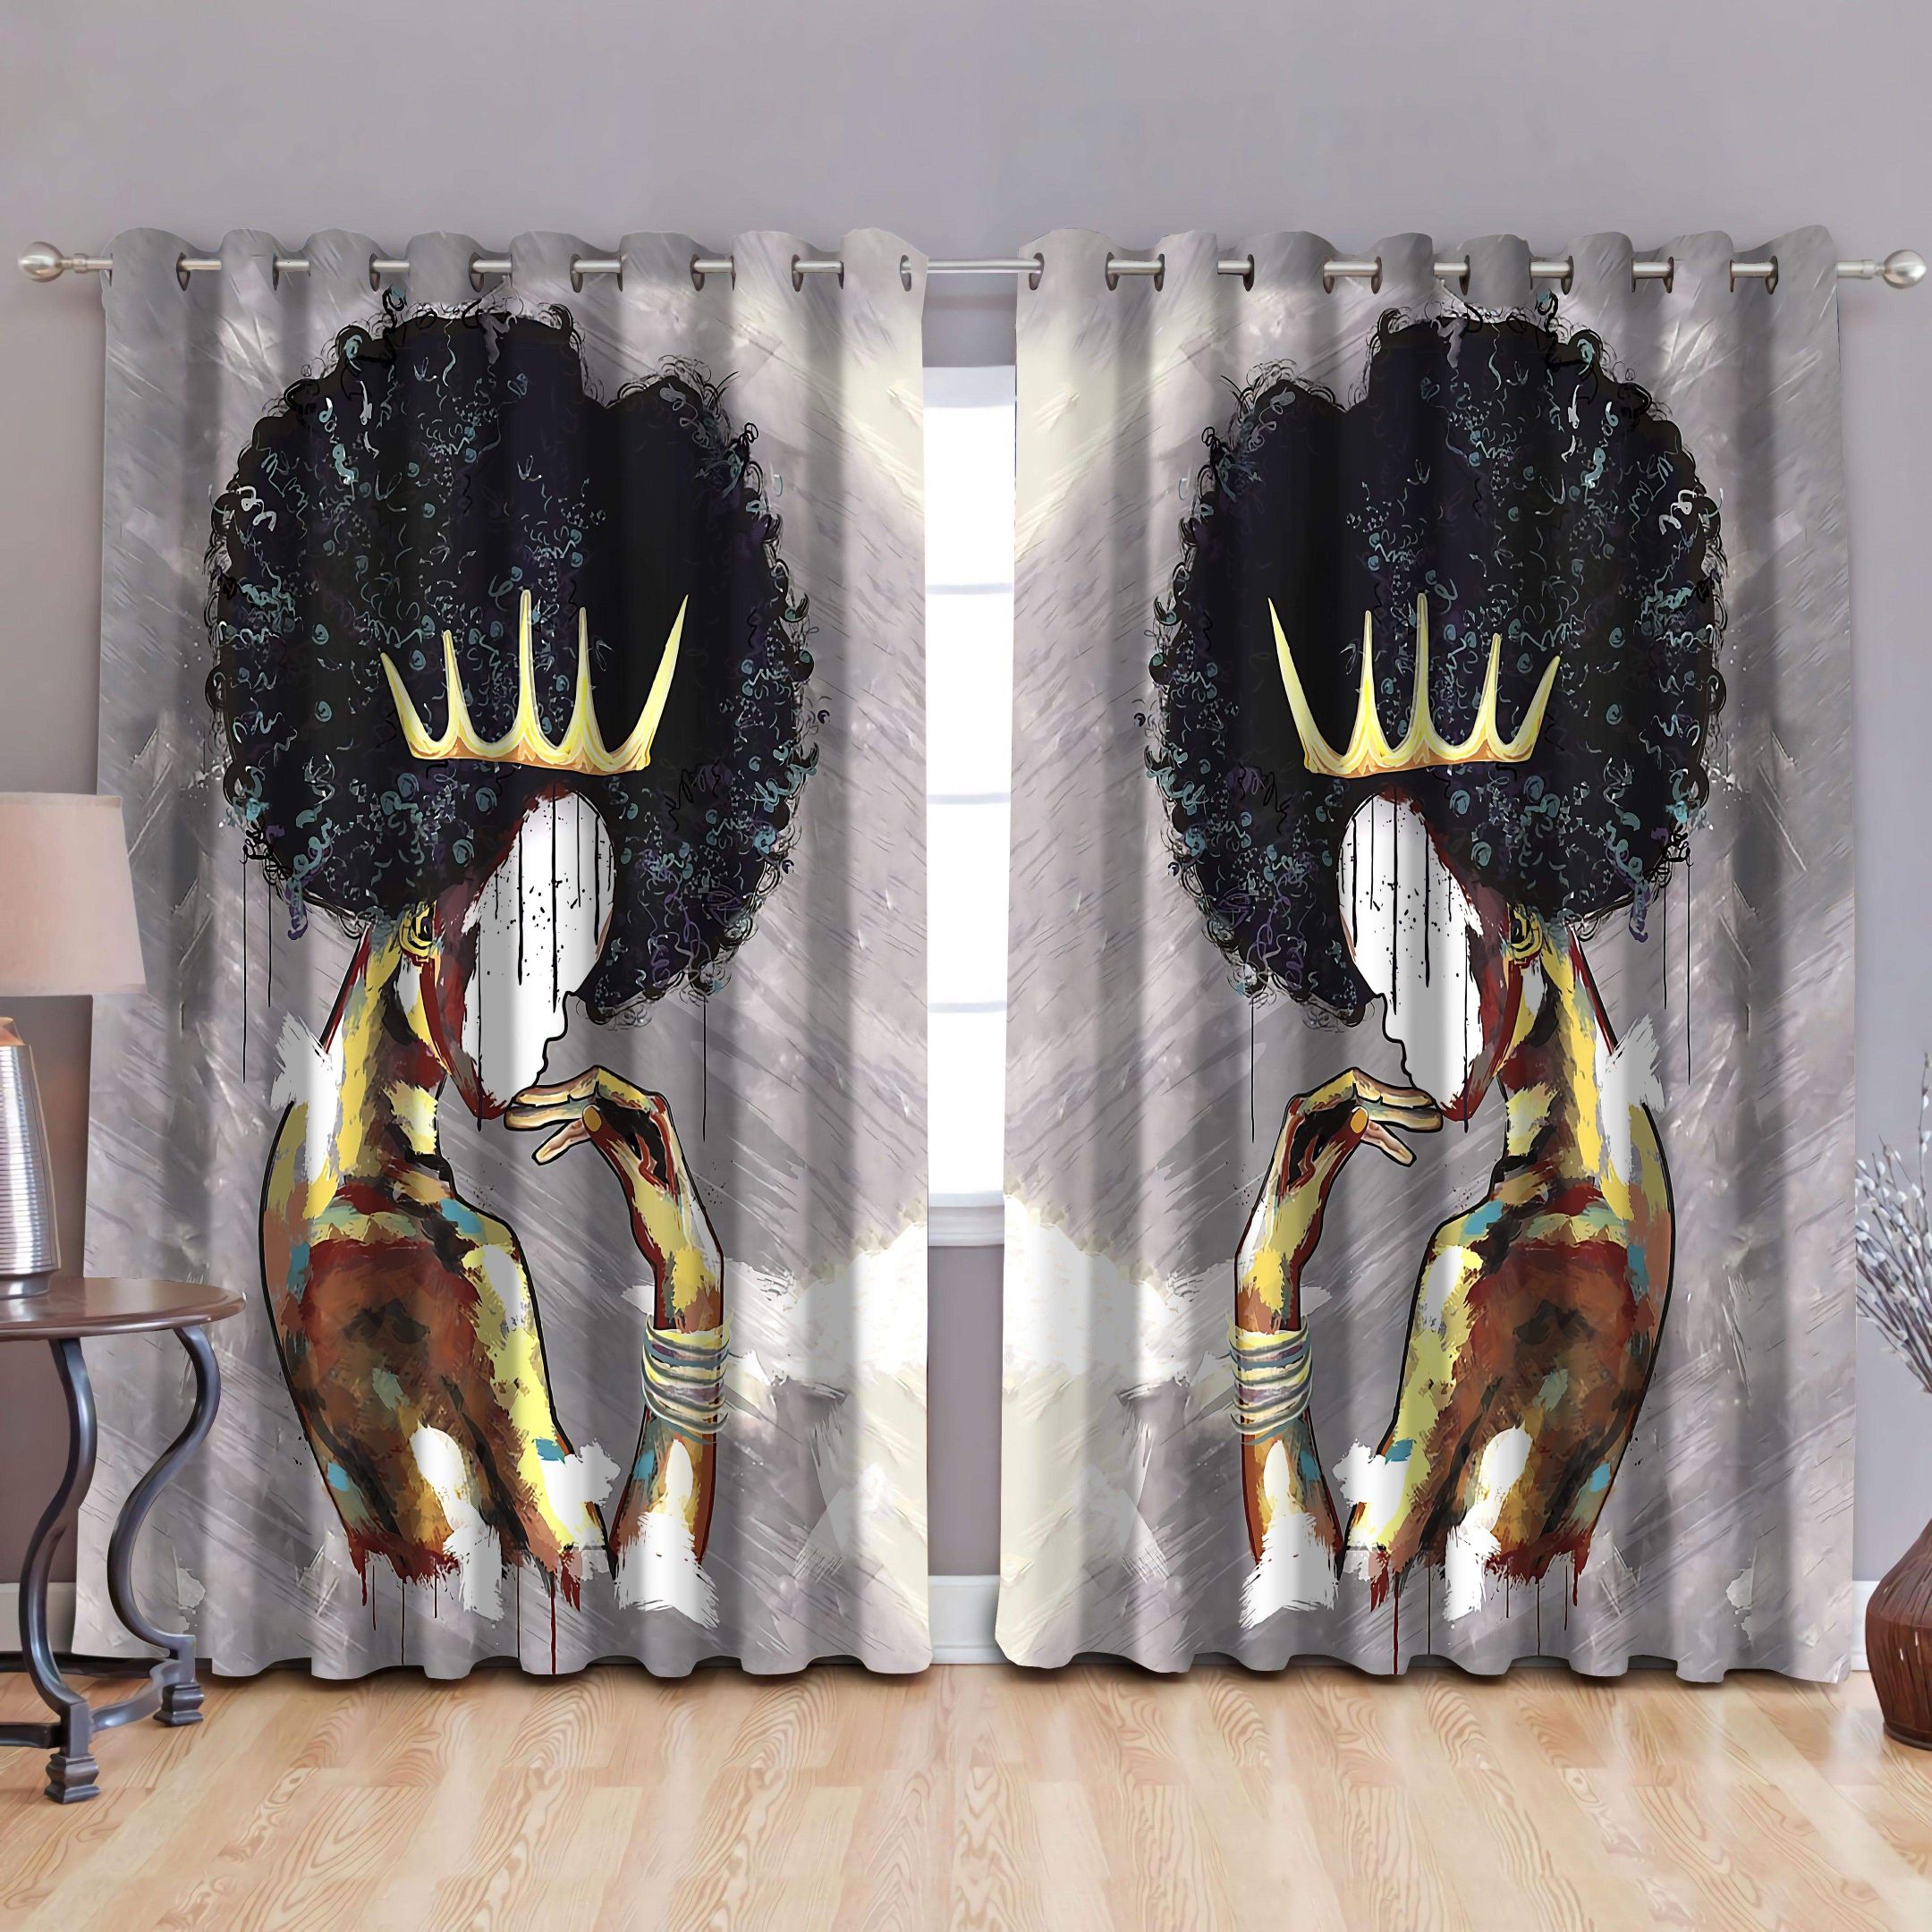 Black Girl Crown Afro Window Curtains